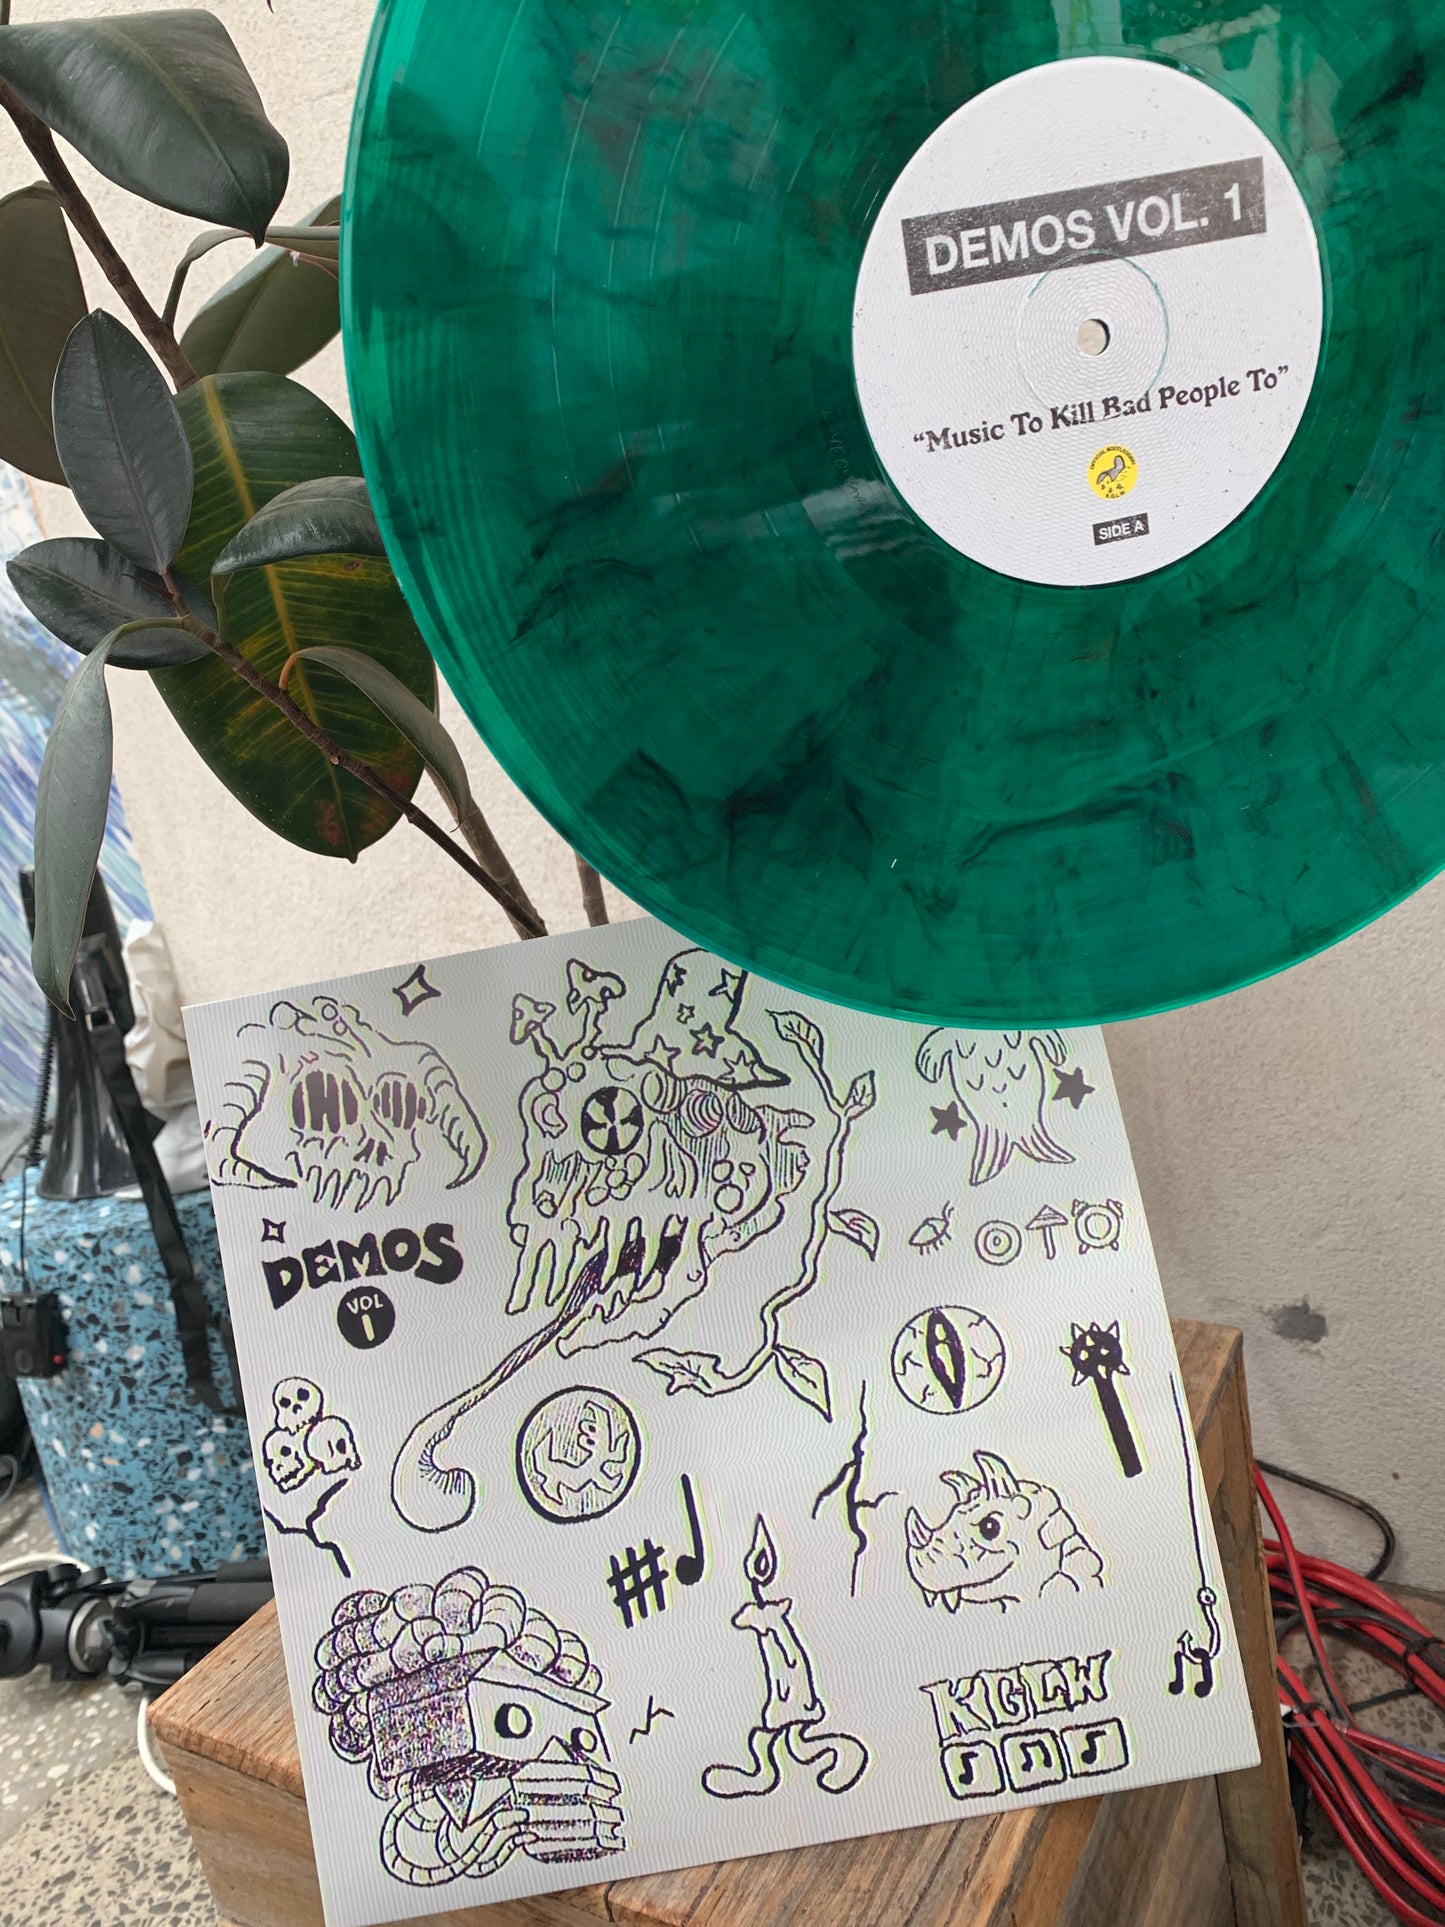 DEMOS VOL. 1. "Music To Kill Bad People To" Green w/ smoke 12" Vinyl (Bootleg by Magnetic South)